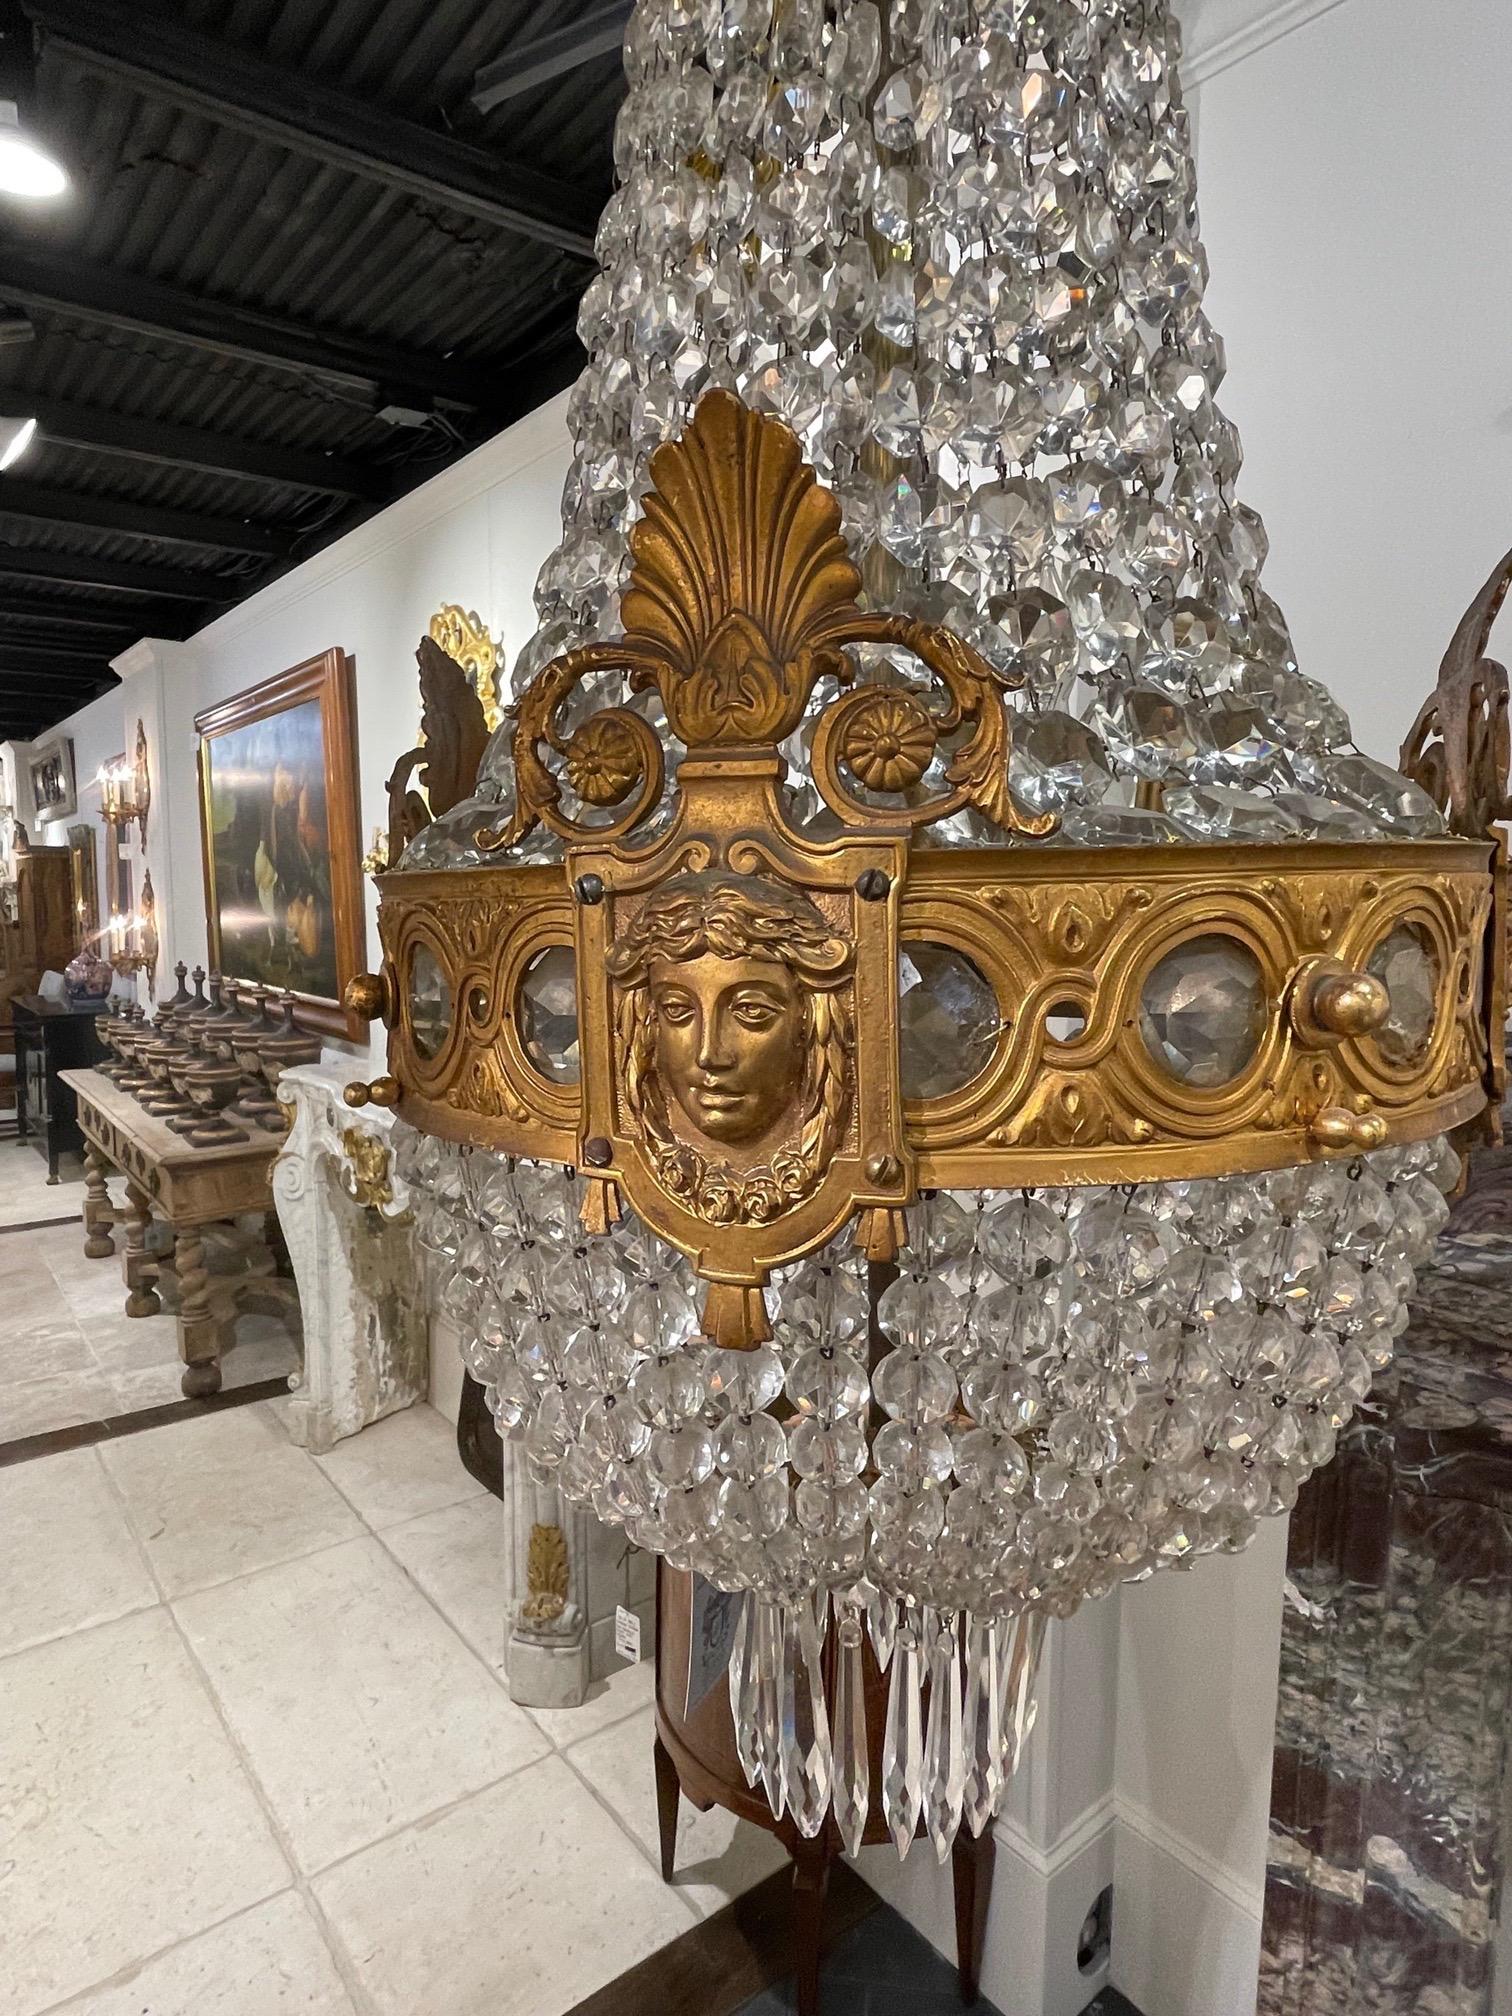 Very fine 19th century French bronze and crystal basket chandelier. Featuring gorgeous crystals and pretty designs on the bronze including a women's face. Beautiful!